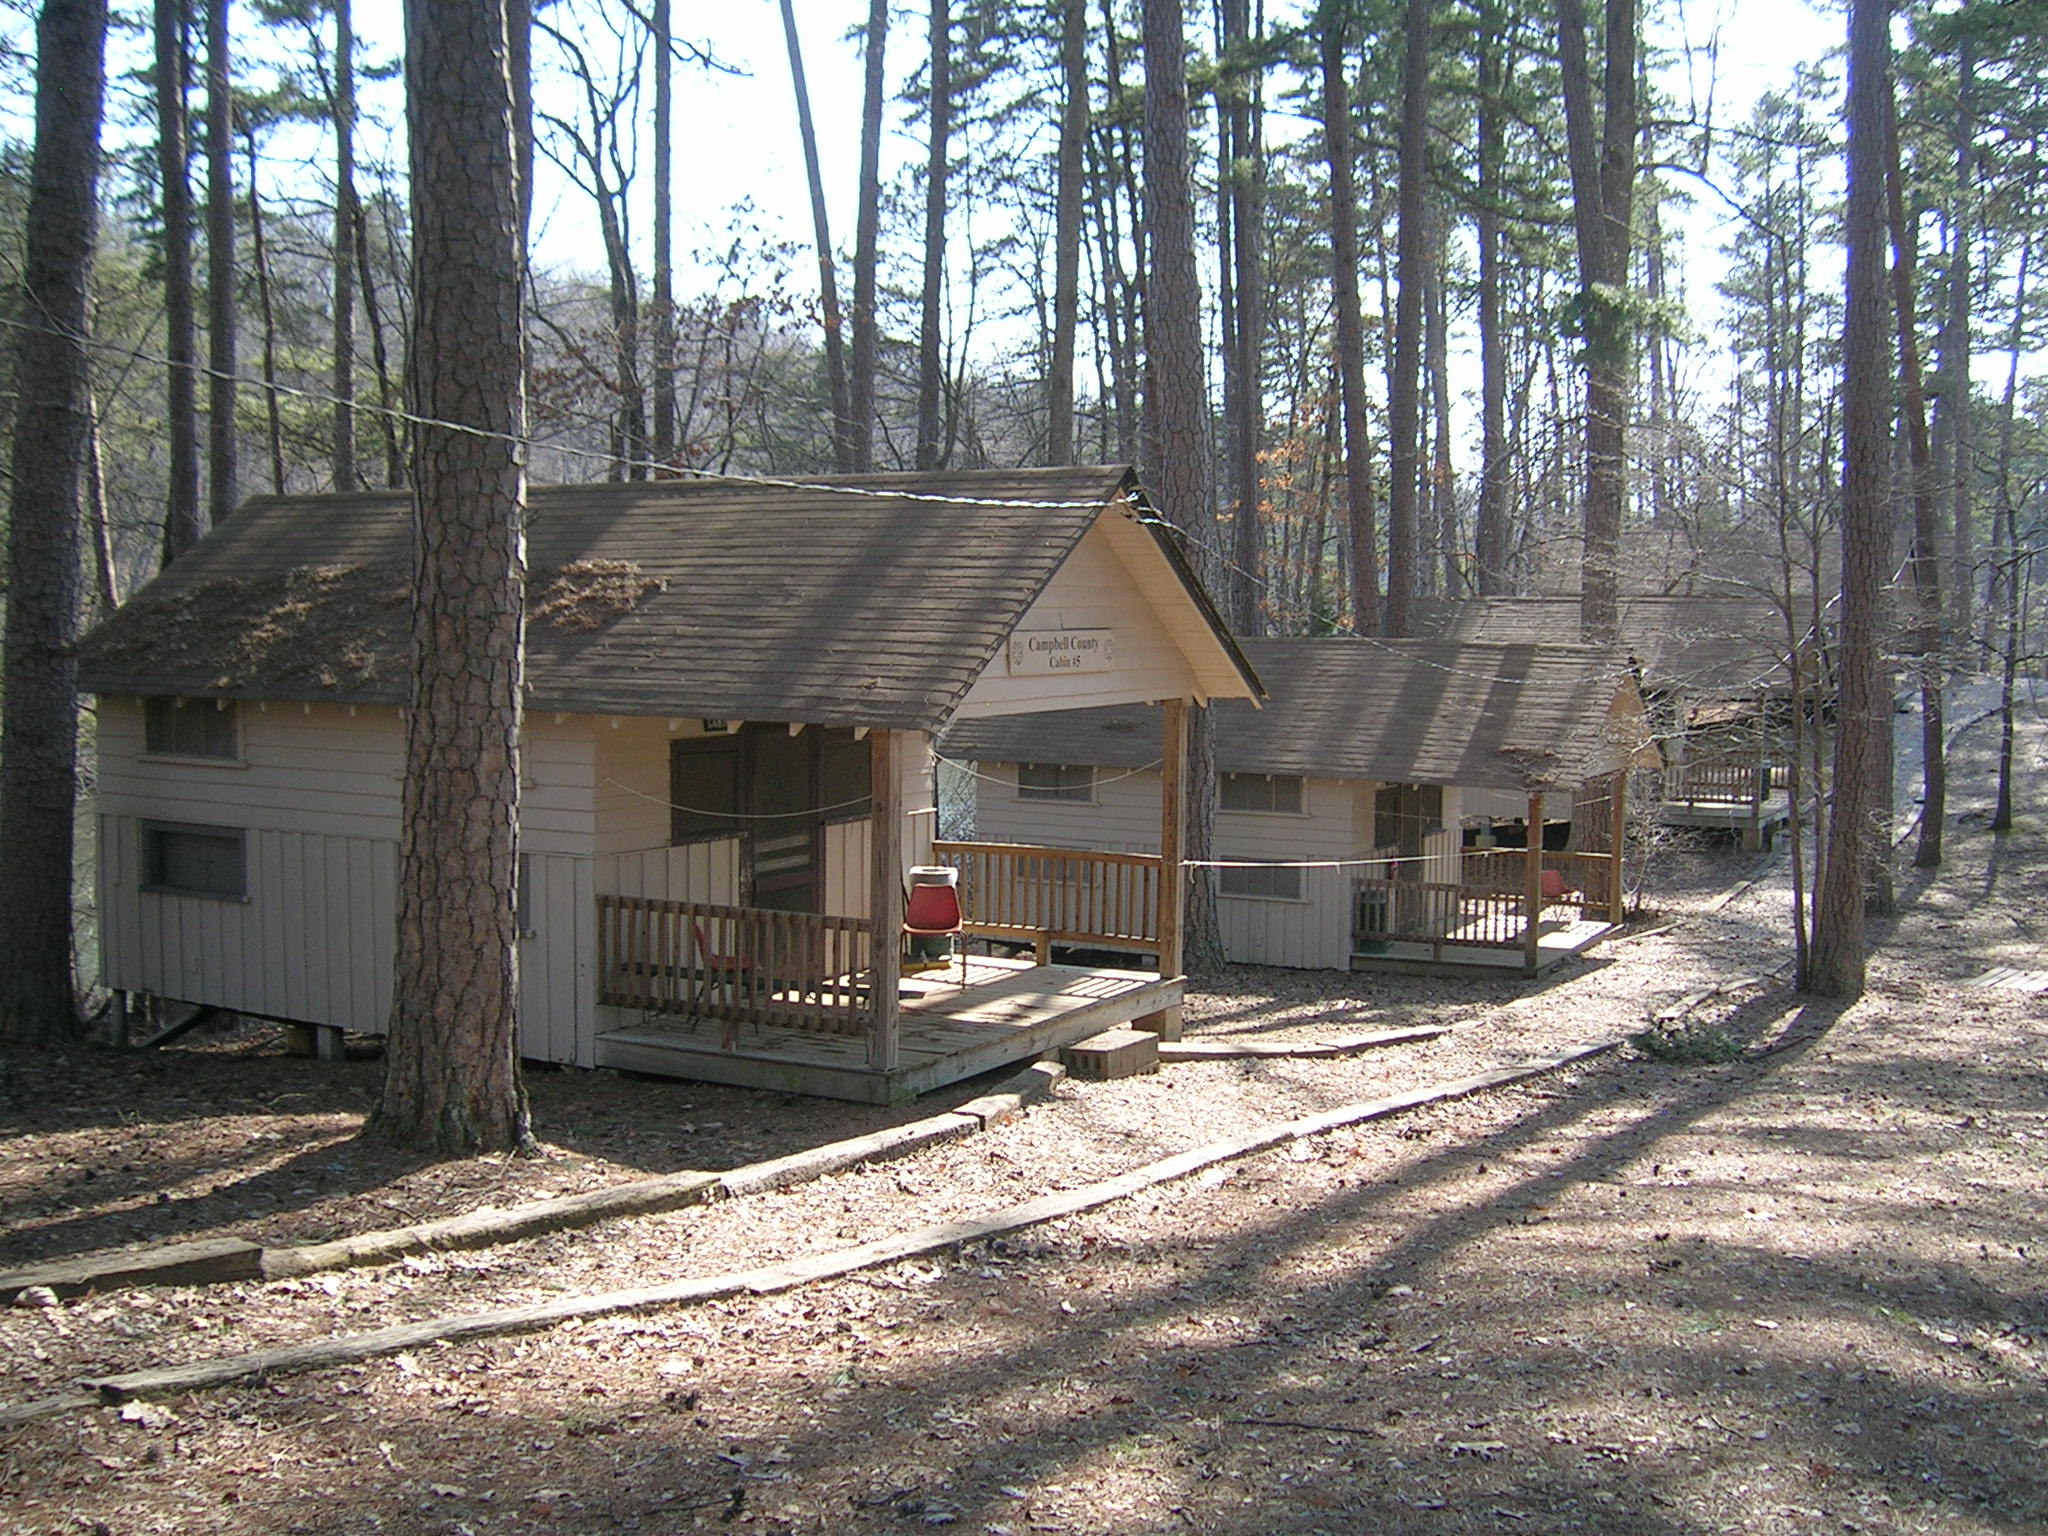 006-5009_Holiday_Lake_4-H_Ed_Center_HD_2010_girls_cabins_view_VLR_Online